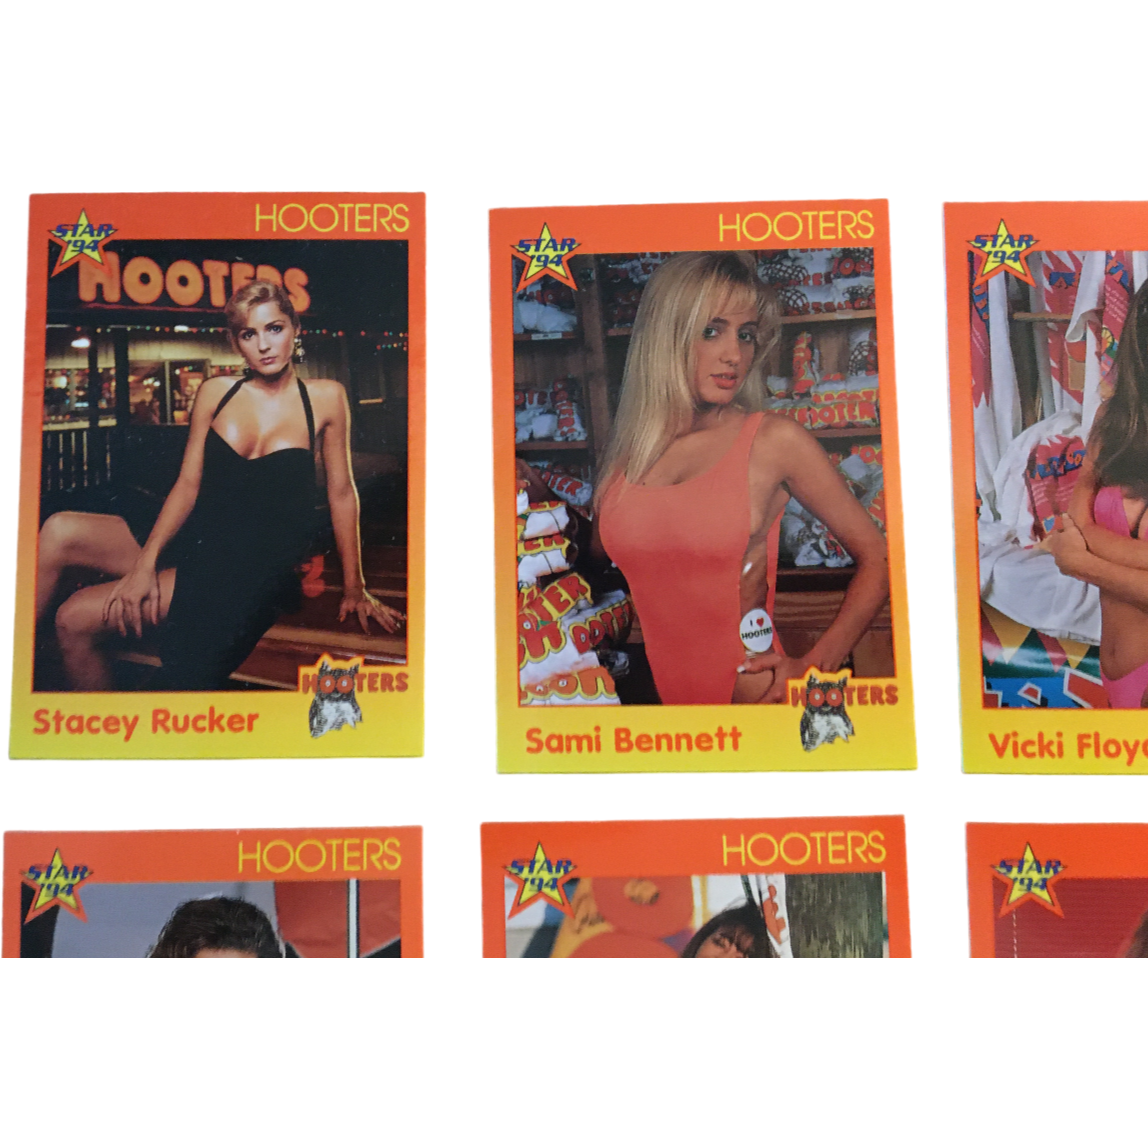 Hooters Collector Cards